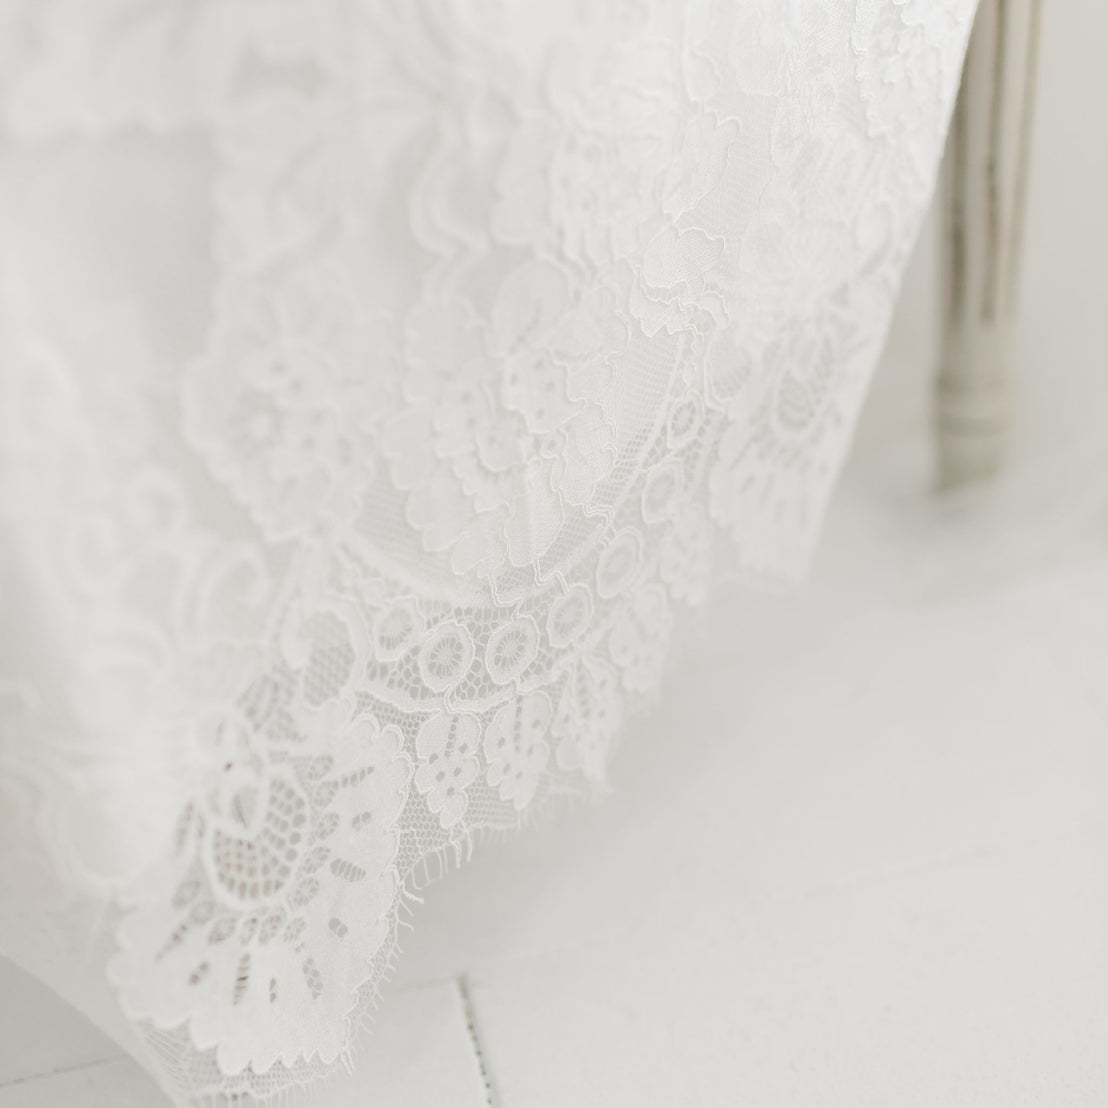 Close-up of white lace fabric with intricate floral patterns, reminiscent of a Victoria Puff Sleeve Christening Gown & Bonnet. The delicate, embroidered lace features various flower designs and fine netting, showcasing detailed craftsmanship. Part of a white chair or stool is visible to the right of the handmade USA fabric.